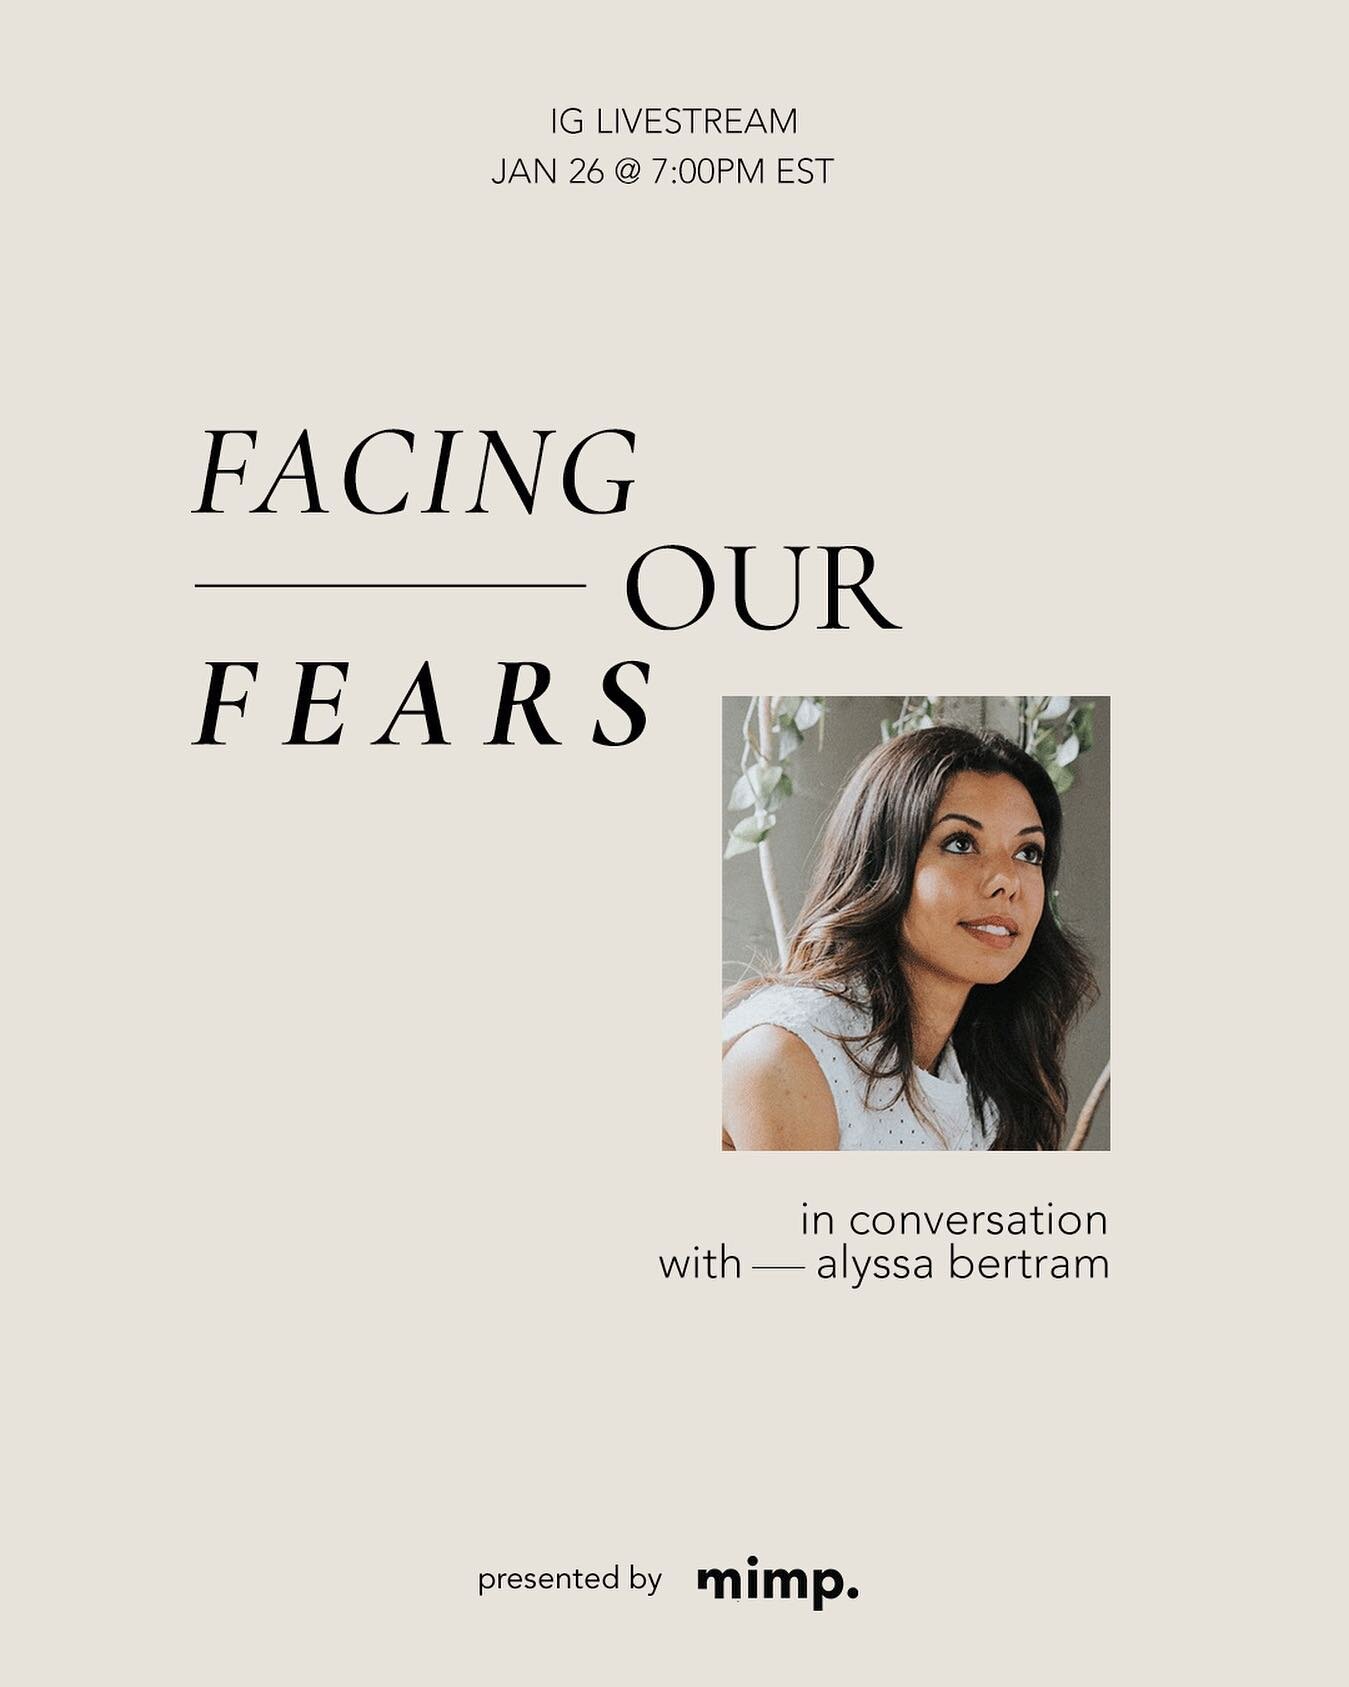 Join us for a conversation with @easyperiod founder Alyssa Bertram. Listen in to hear how facing her fears helped her start her business, find a healthy relationship and supports her in making big life changes like getting sober and her recent move t